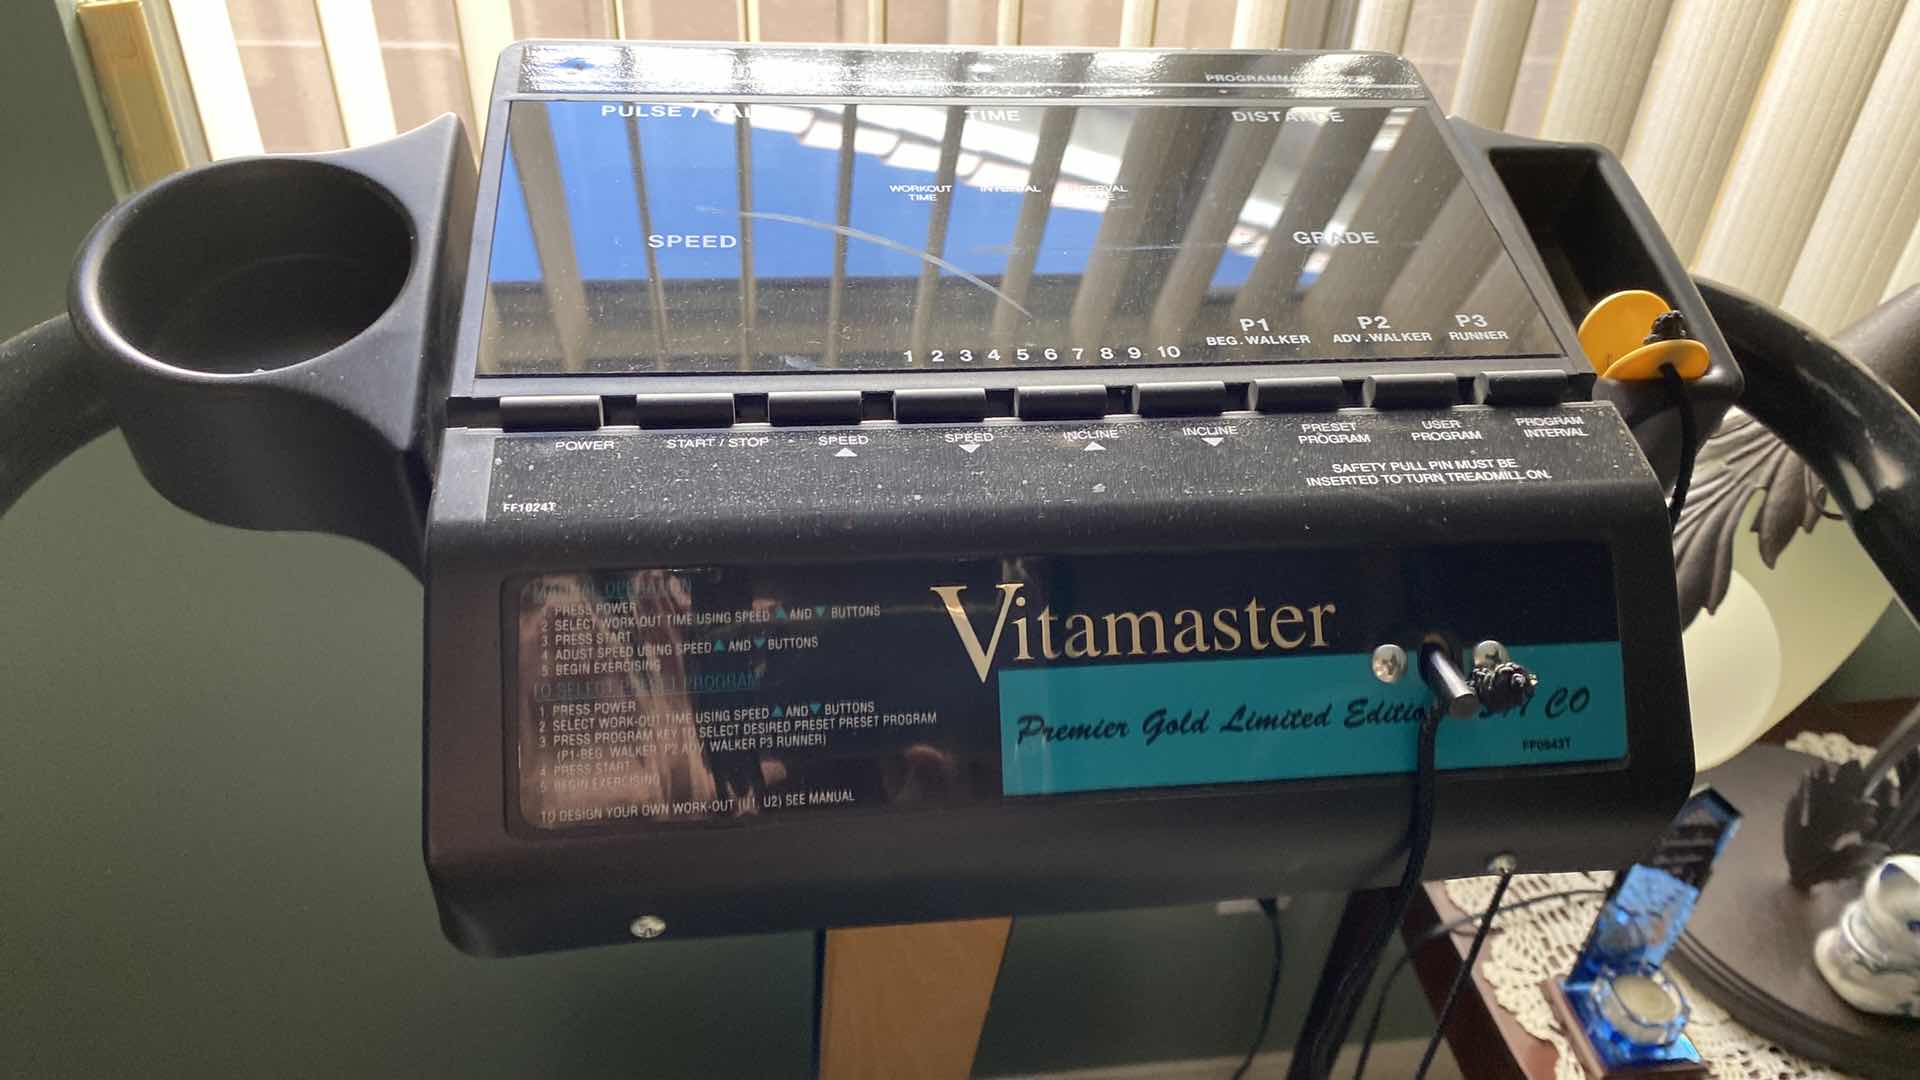 Photo 2 of VITAMASTER PREMIER GOLD LIMITED EDITION TREADMILL